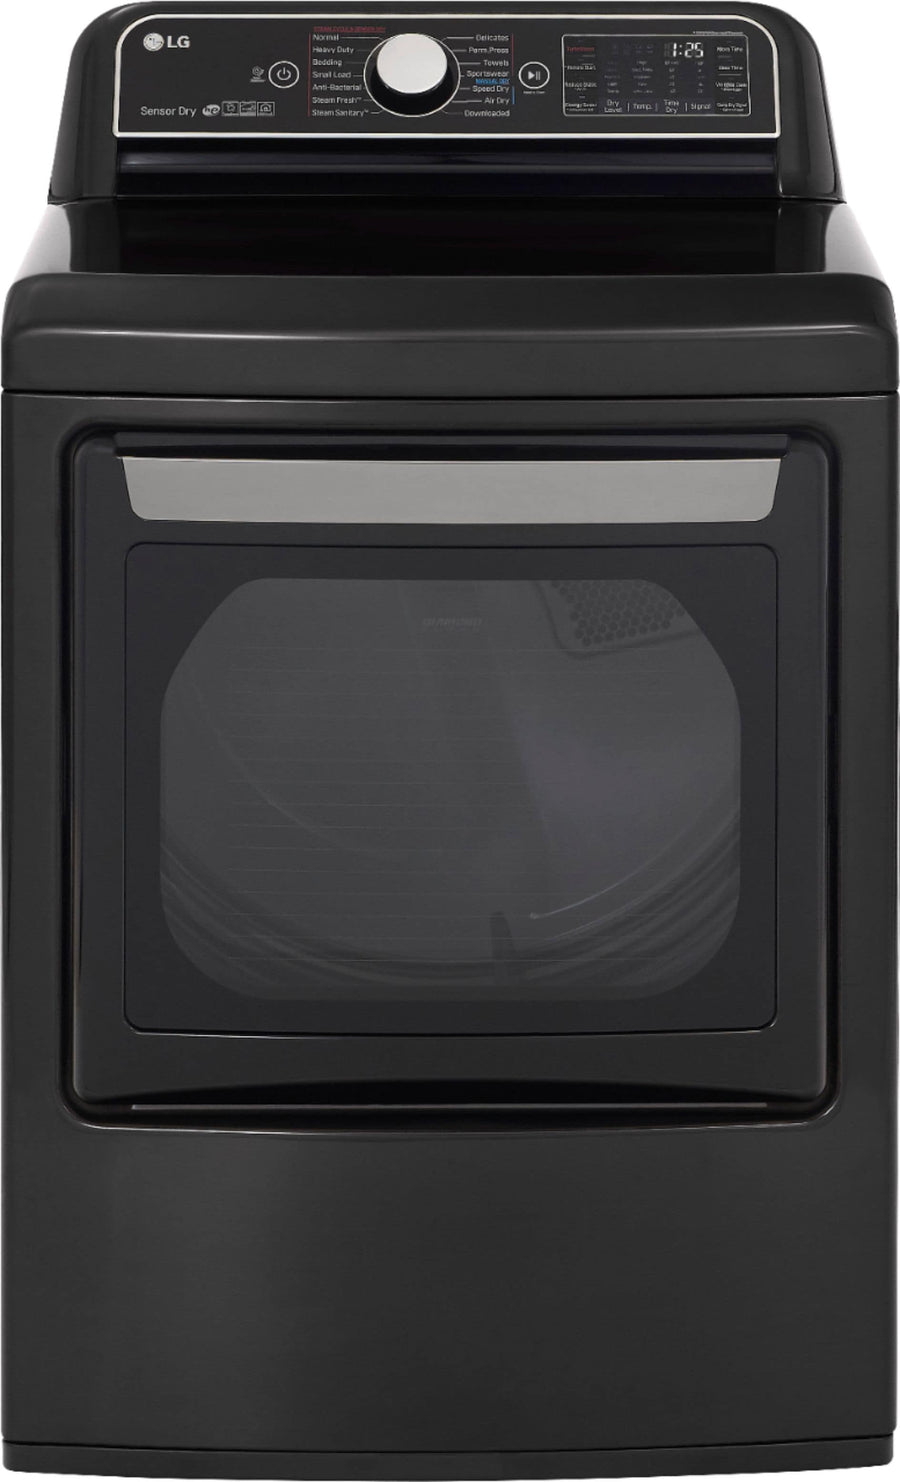 LG - 7.3 Cu. Ft. Smart Gas Dryer with Steam and Sensor Dry - Black steel_0